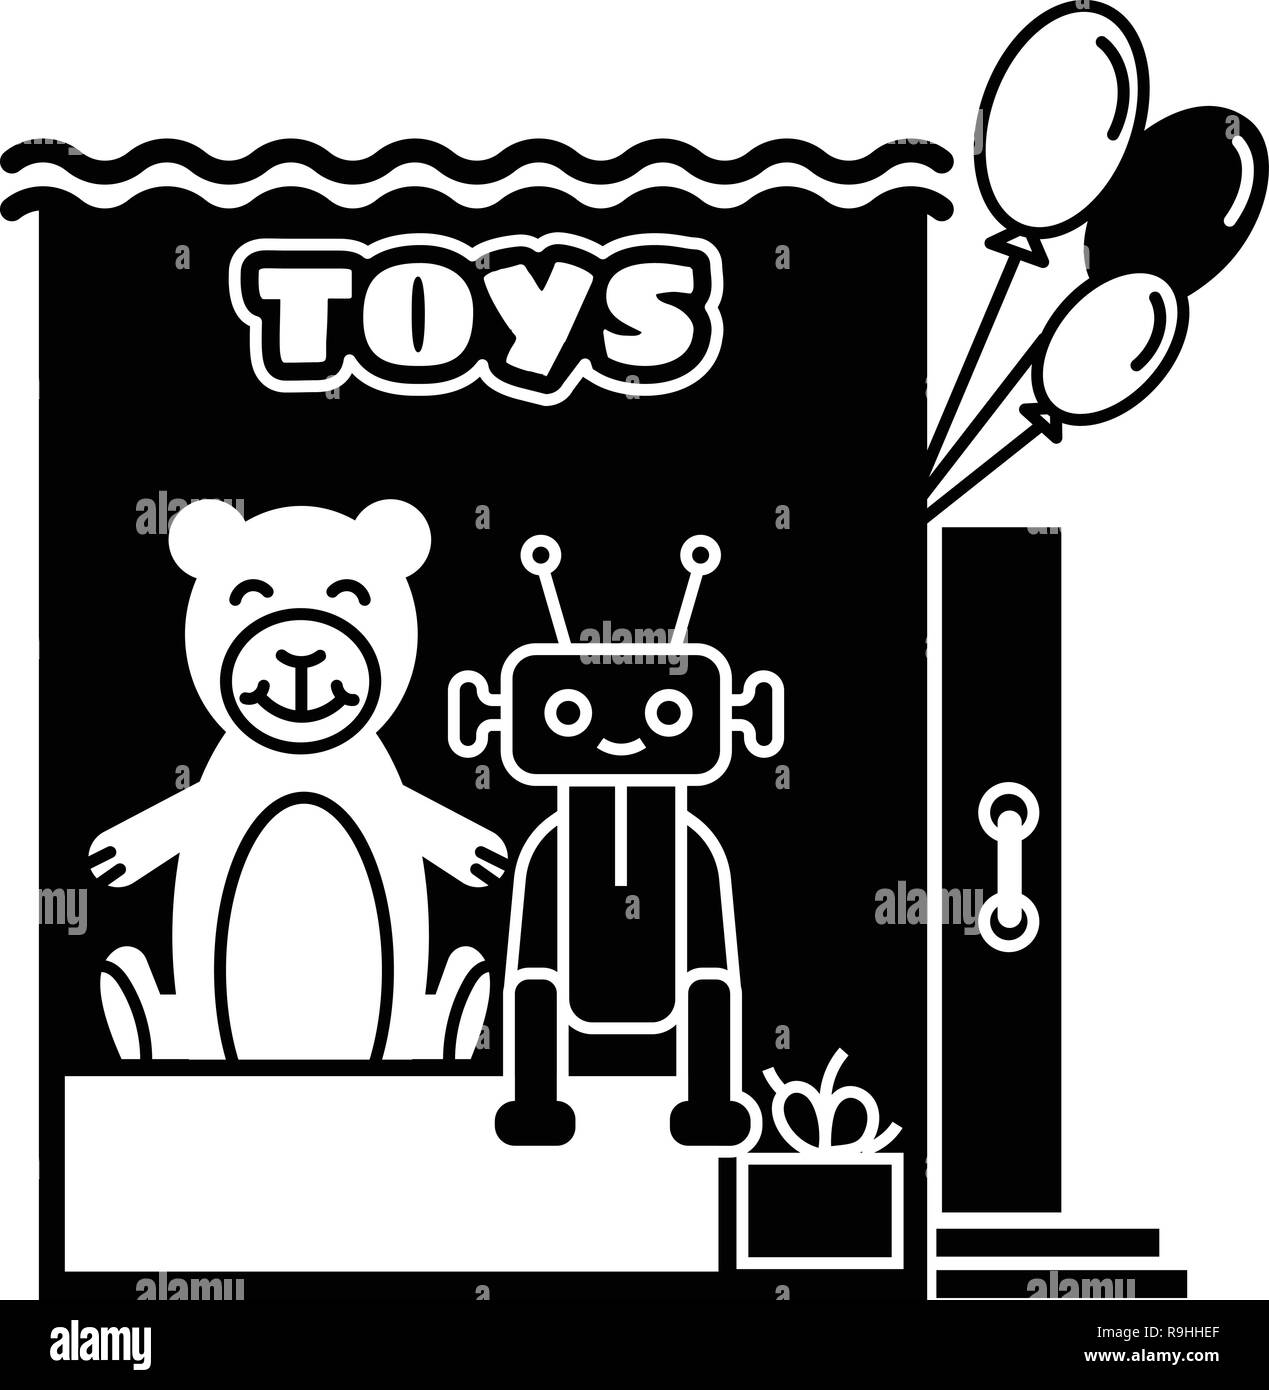 Toy kiosk icon, simple style Stock Vector